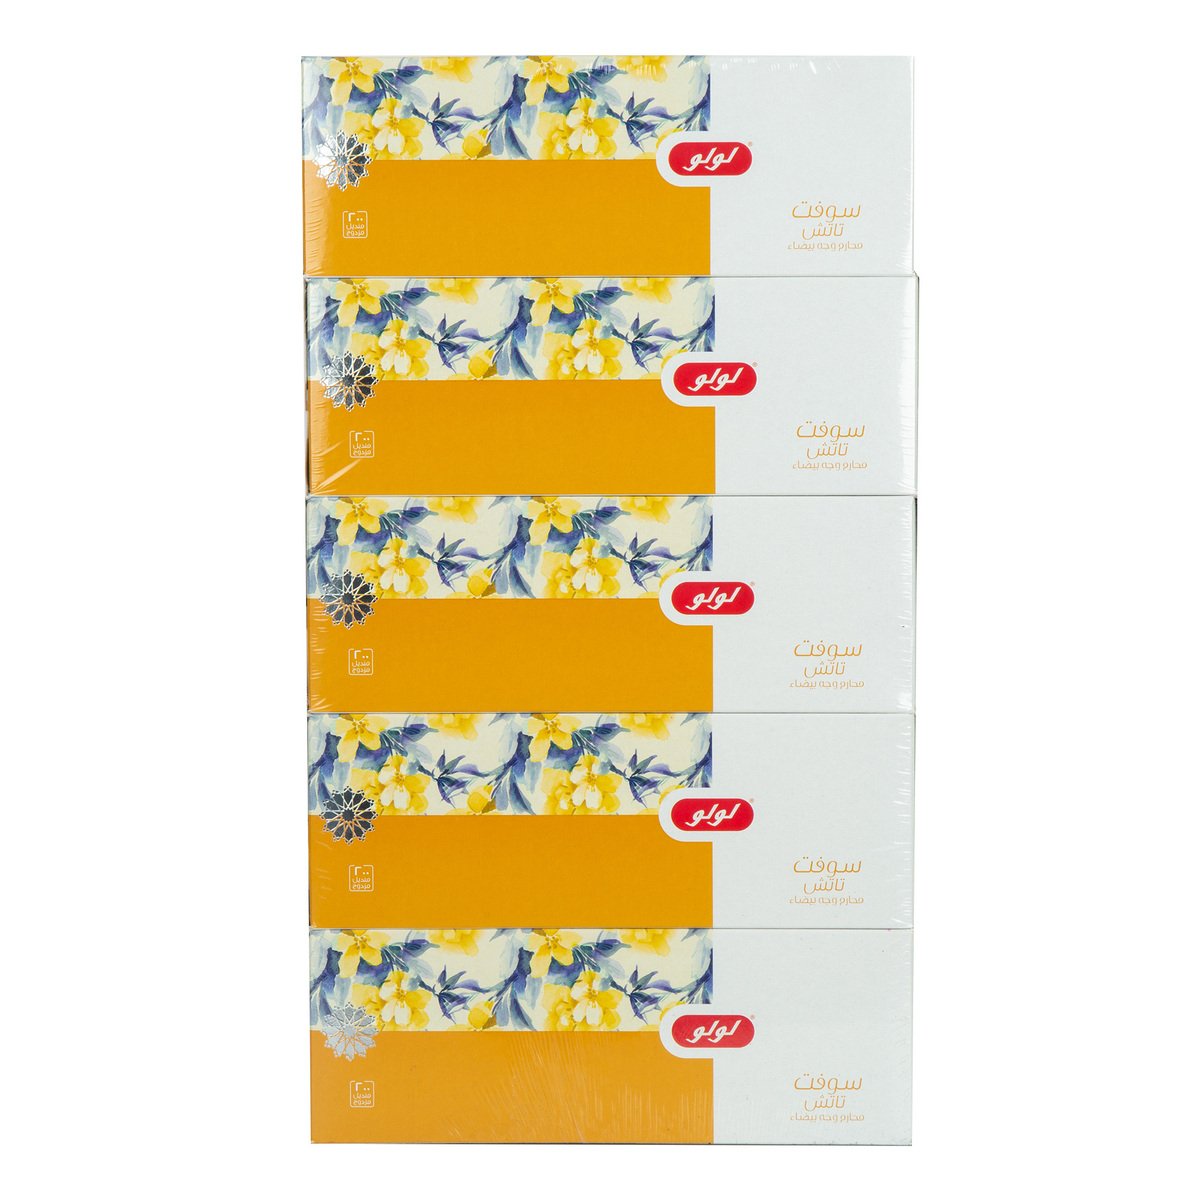 LuLu Softouch Facial Tissue 2ply 200 Sheets 4+1